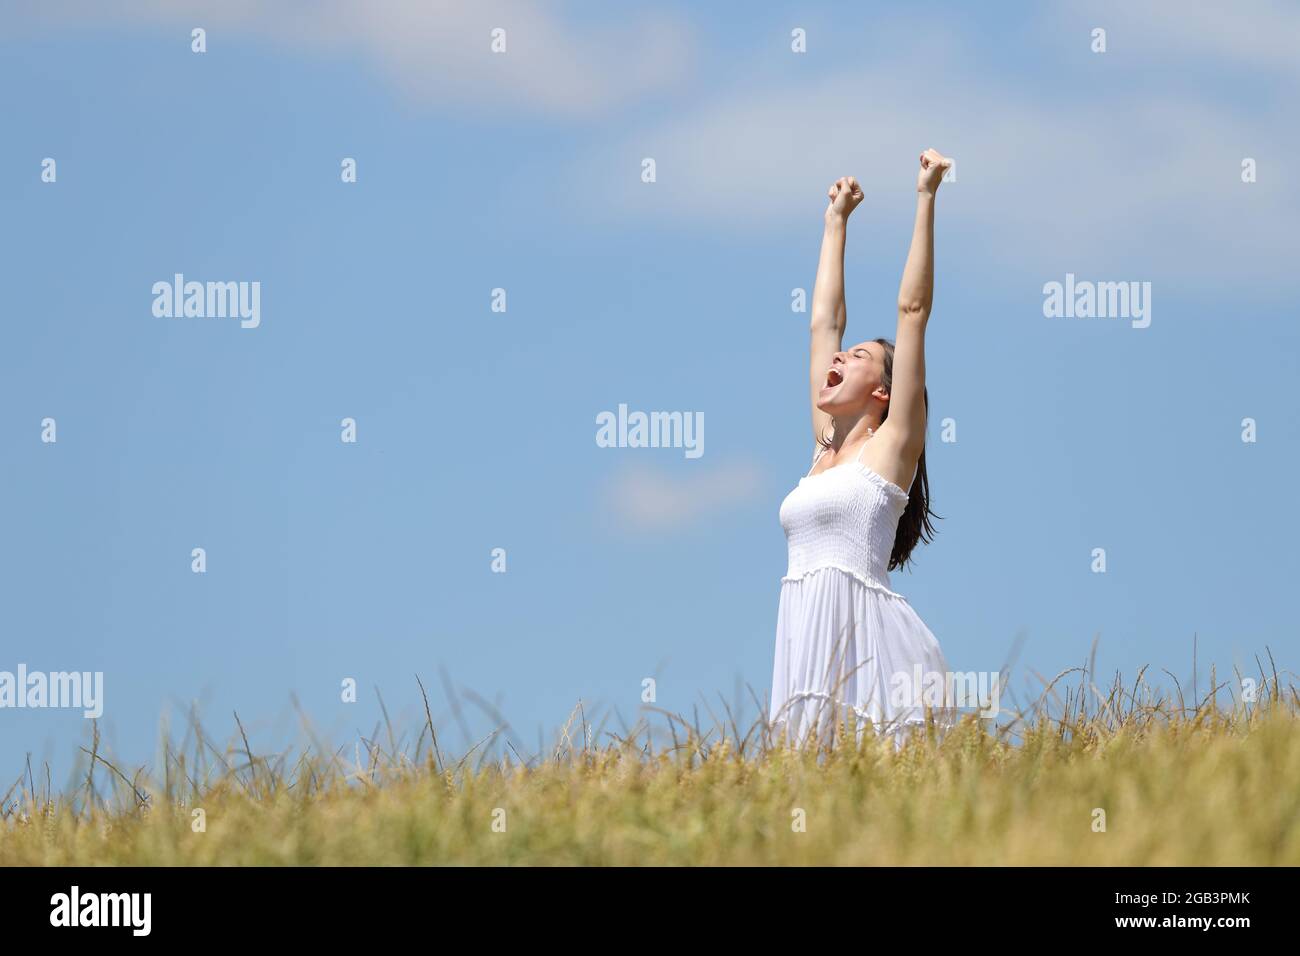 Excited woman celebrating summer vacation raising arms in a wheat field Stock Photo